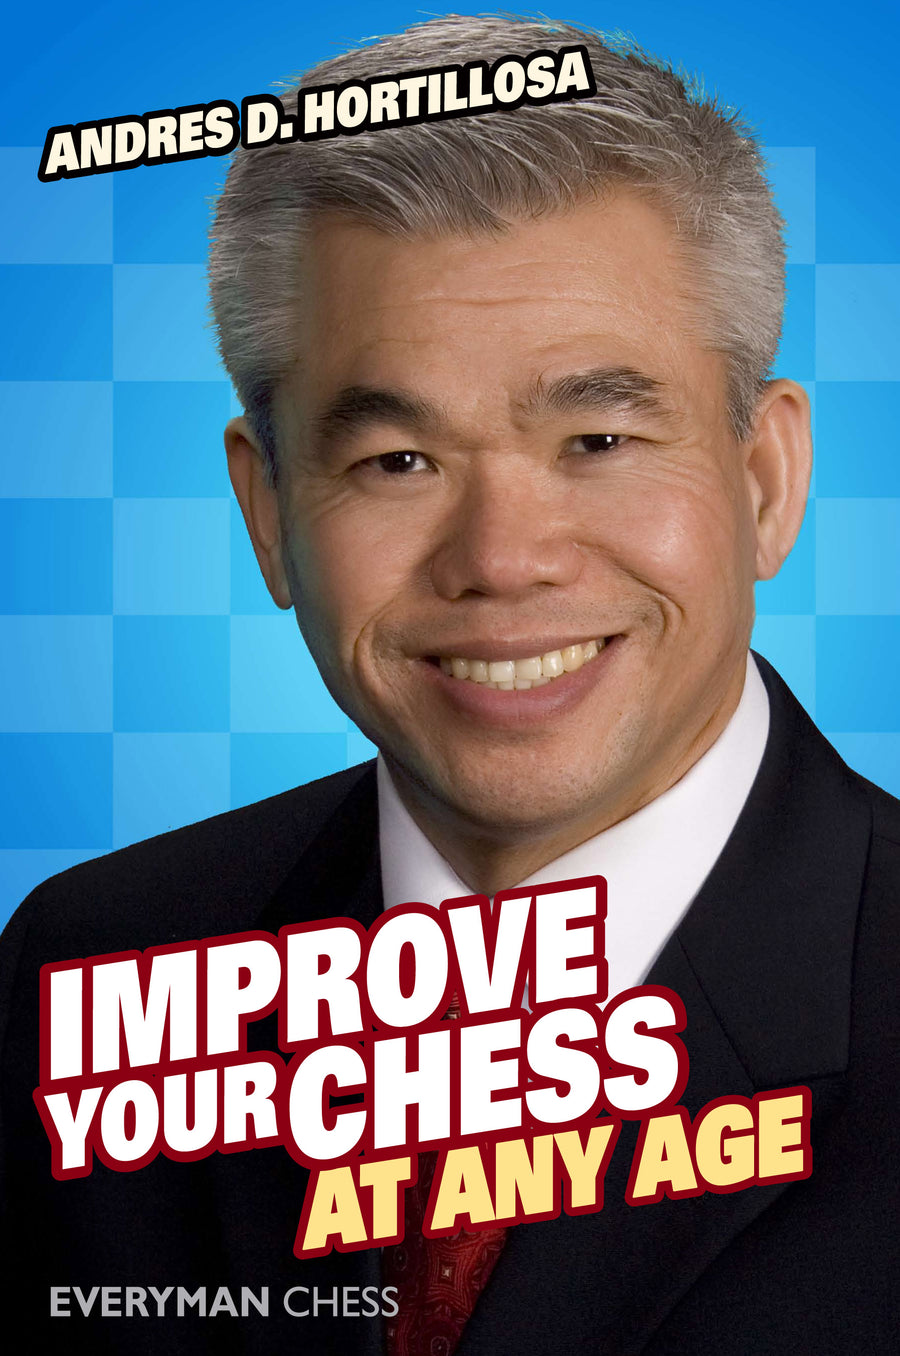 Improve Your Chess at Any Age